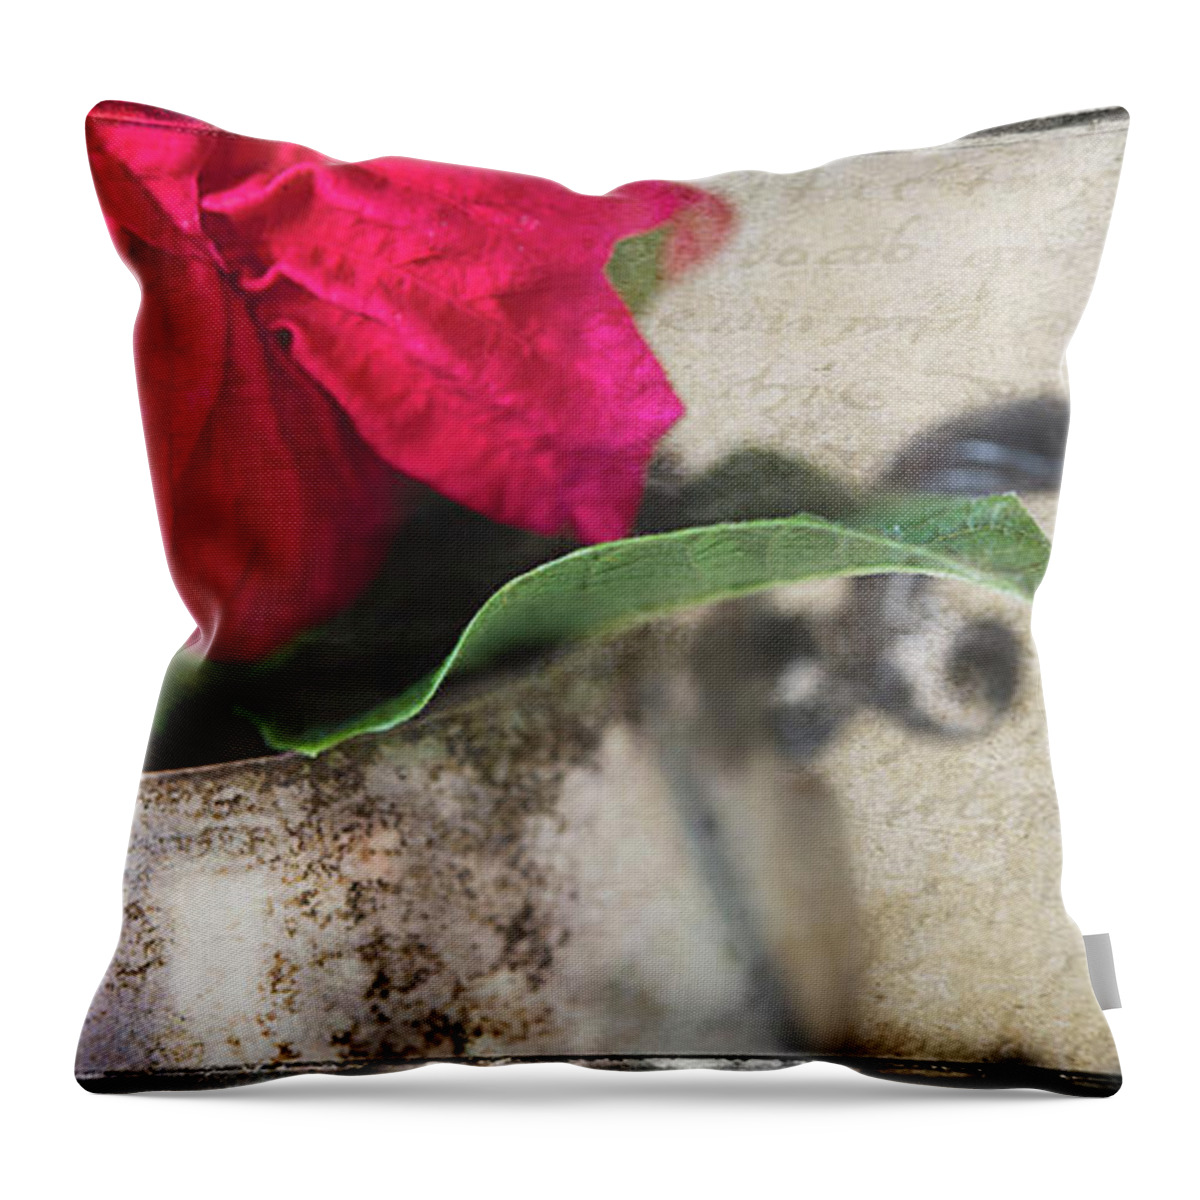 Fine Art Photography Throw Pillow featuring the photograph Sugar Bowl of Poinsettia by John Strong